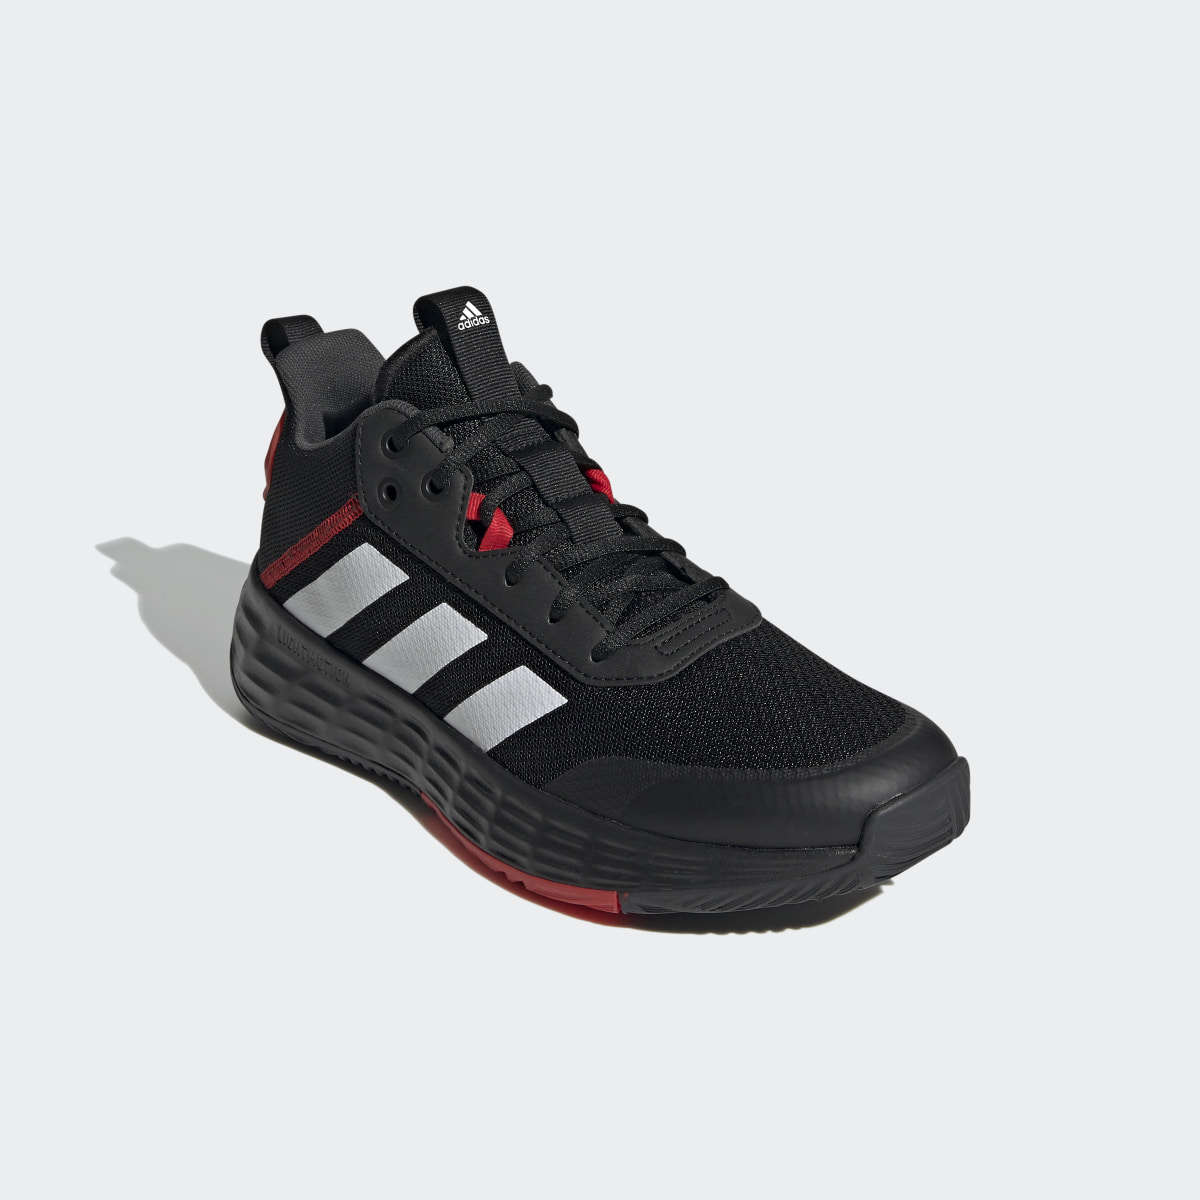 Adidas Chaussure Ownthegame. 5